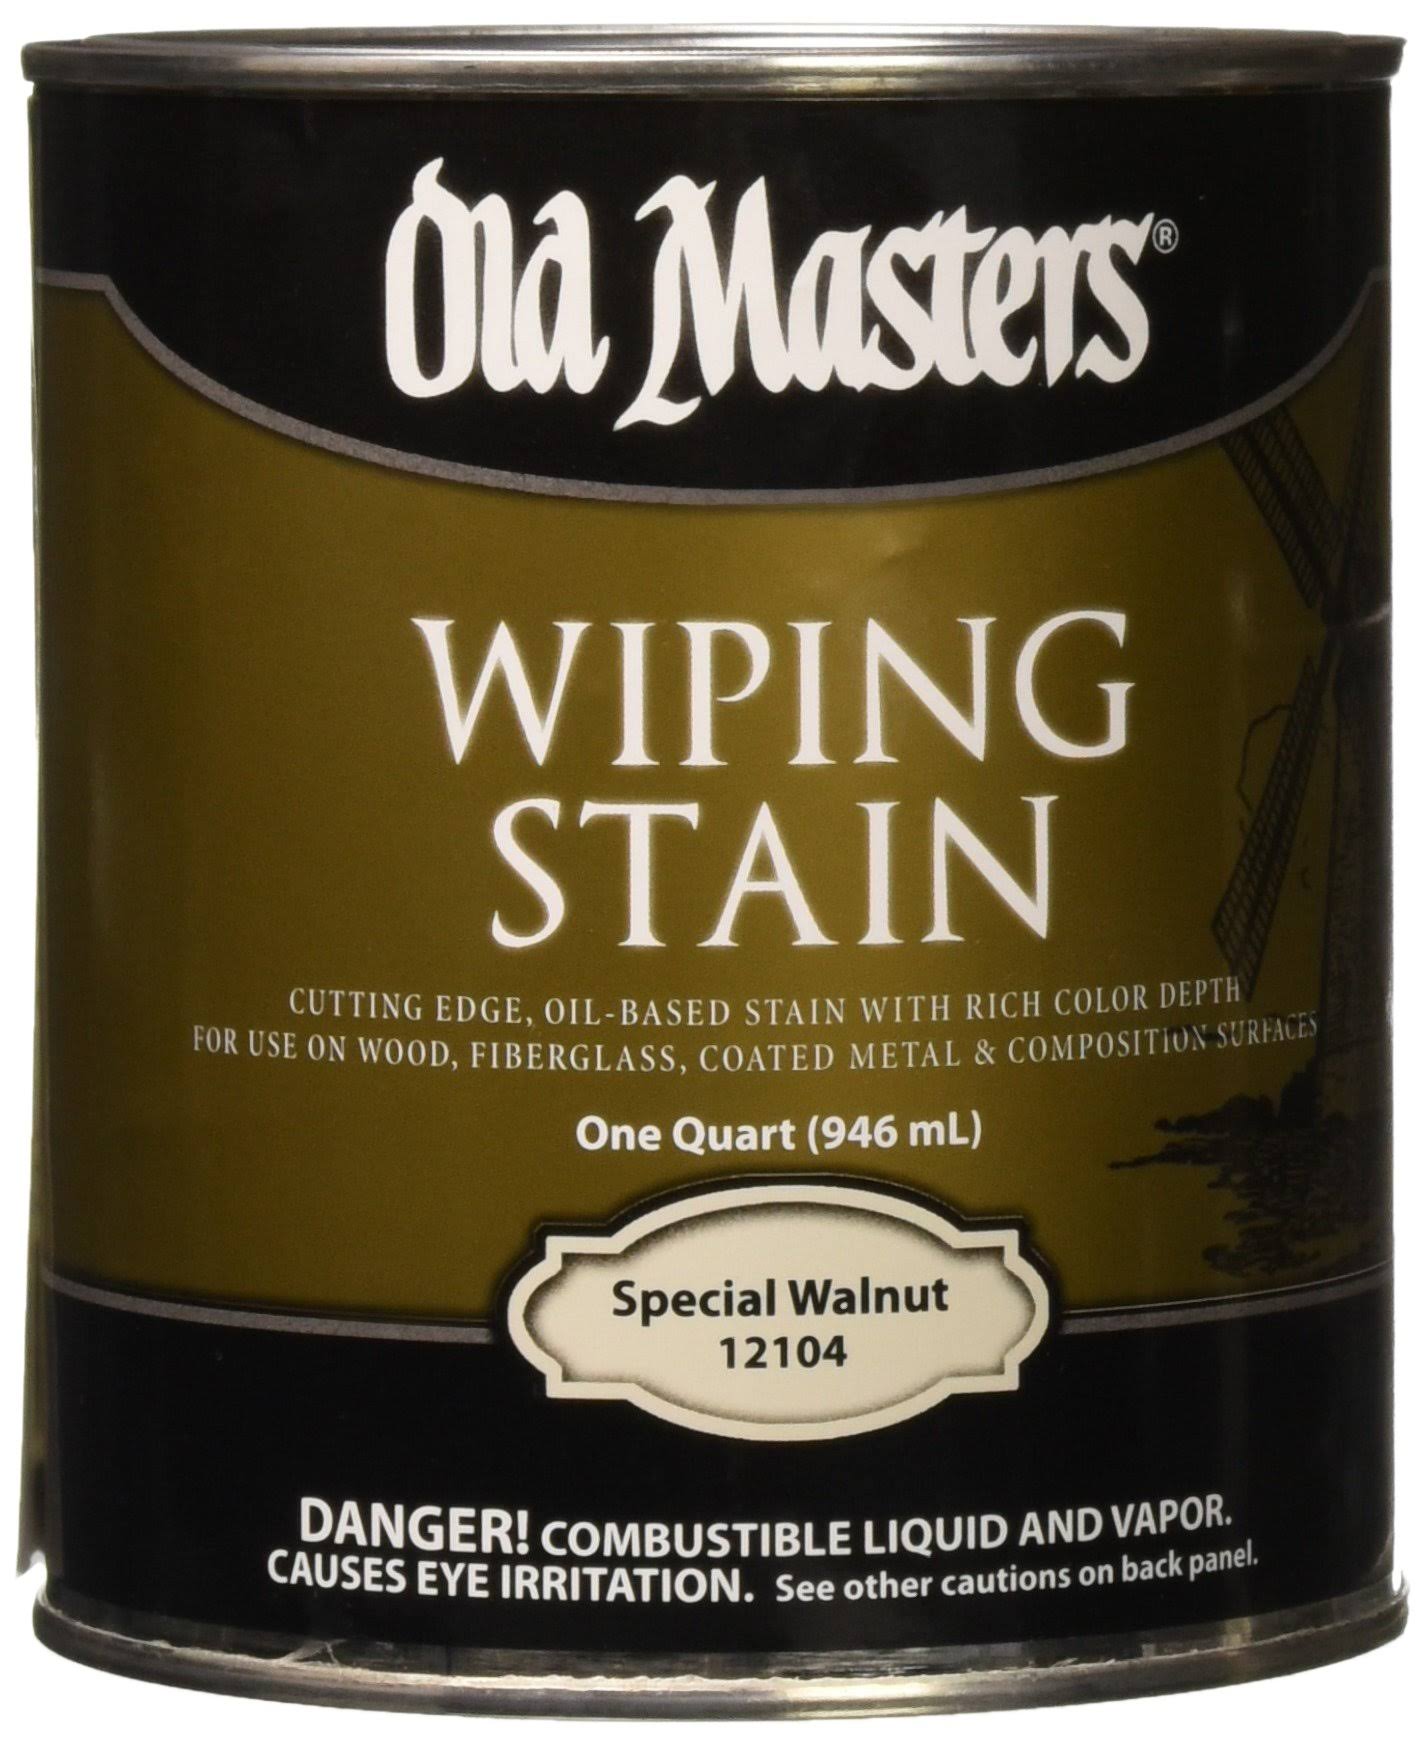 Old Masters Wiping Stain - Special Walnut, 1qt